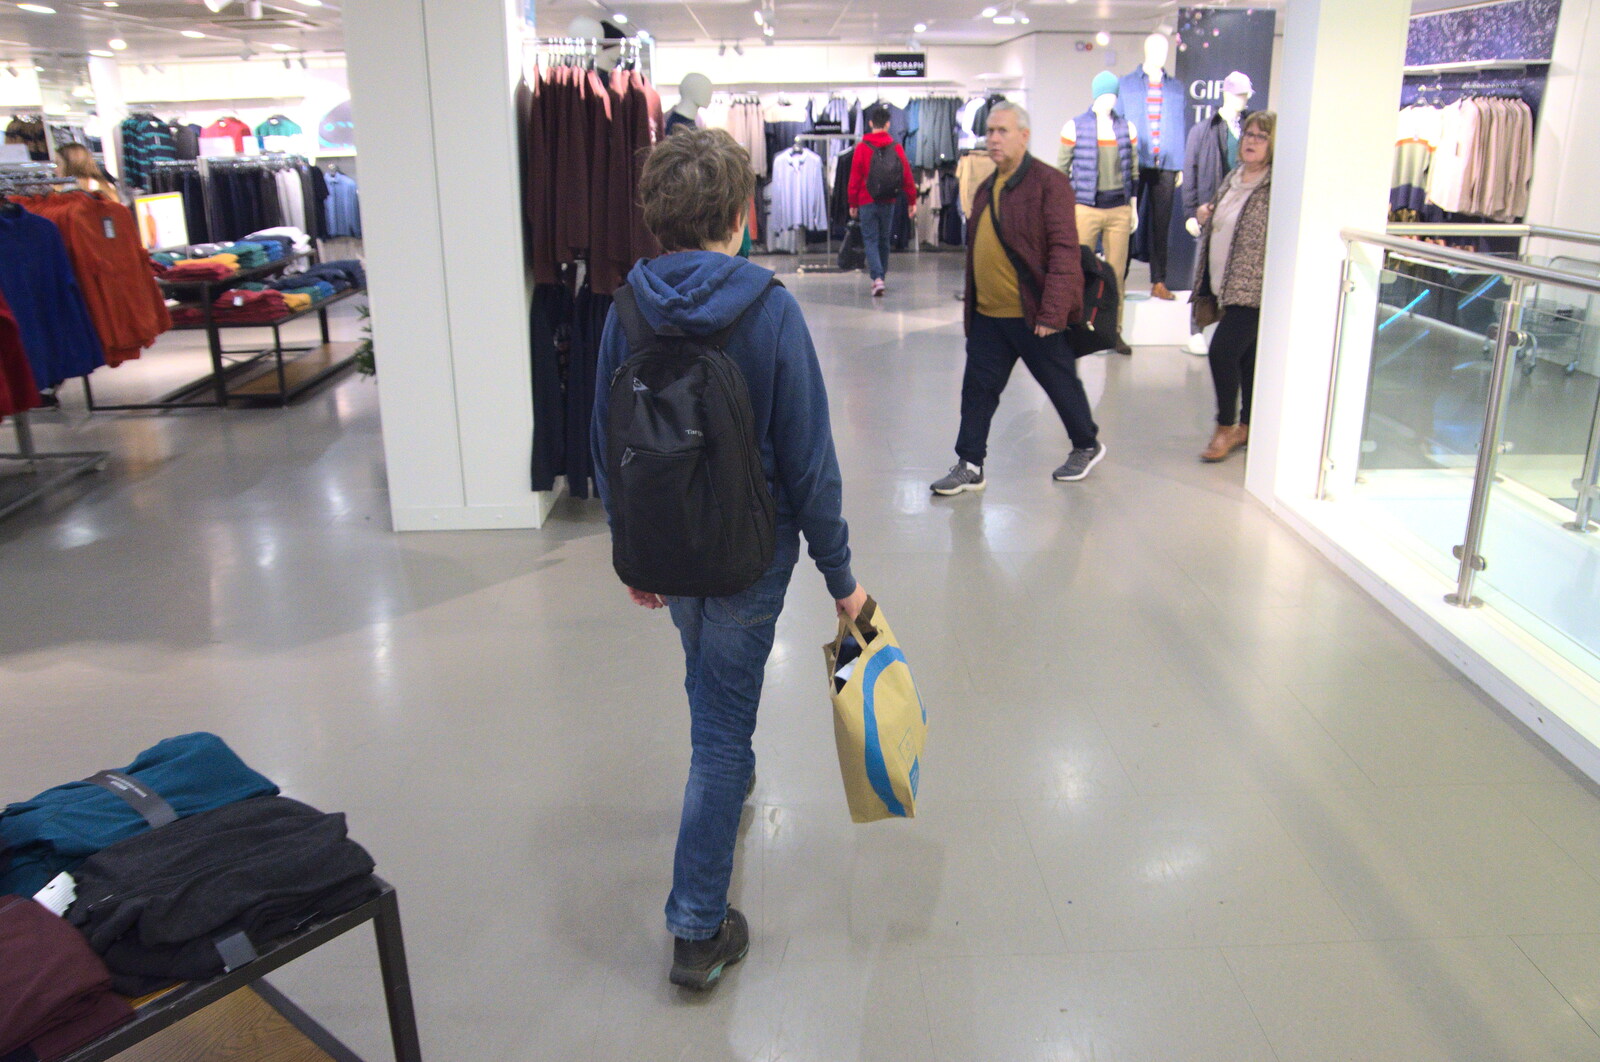 Fred roams around in Marks and Spencer from Christmas Shopping in Norwich, Norfolk - 21st December 2022